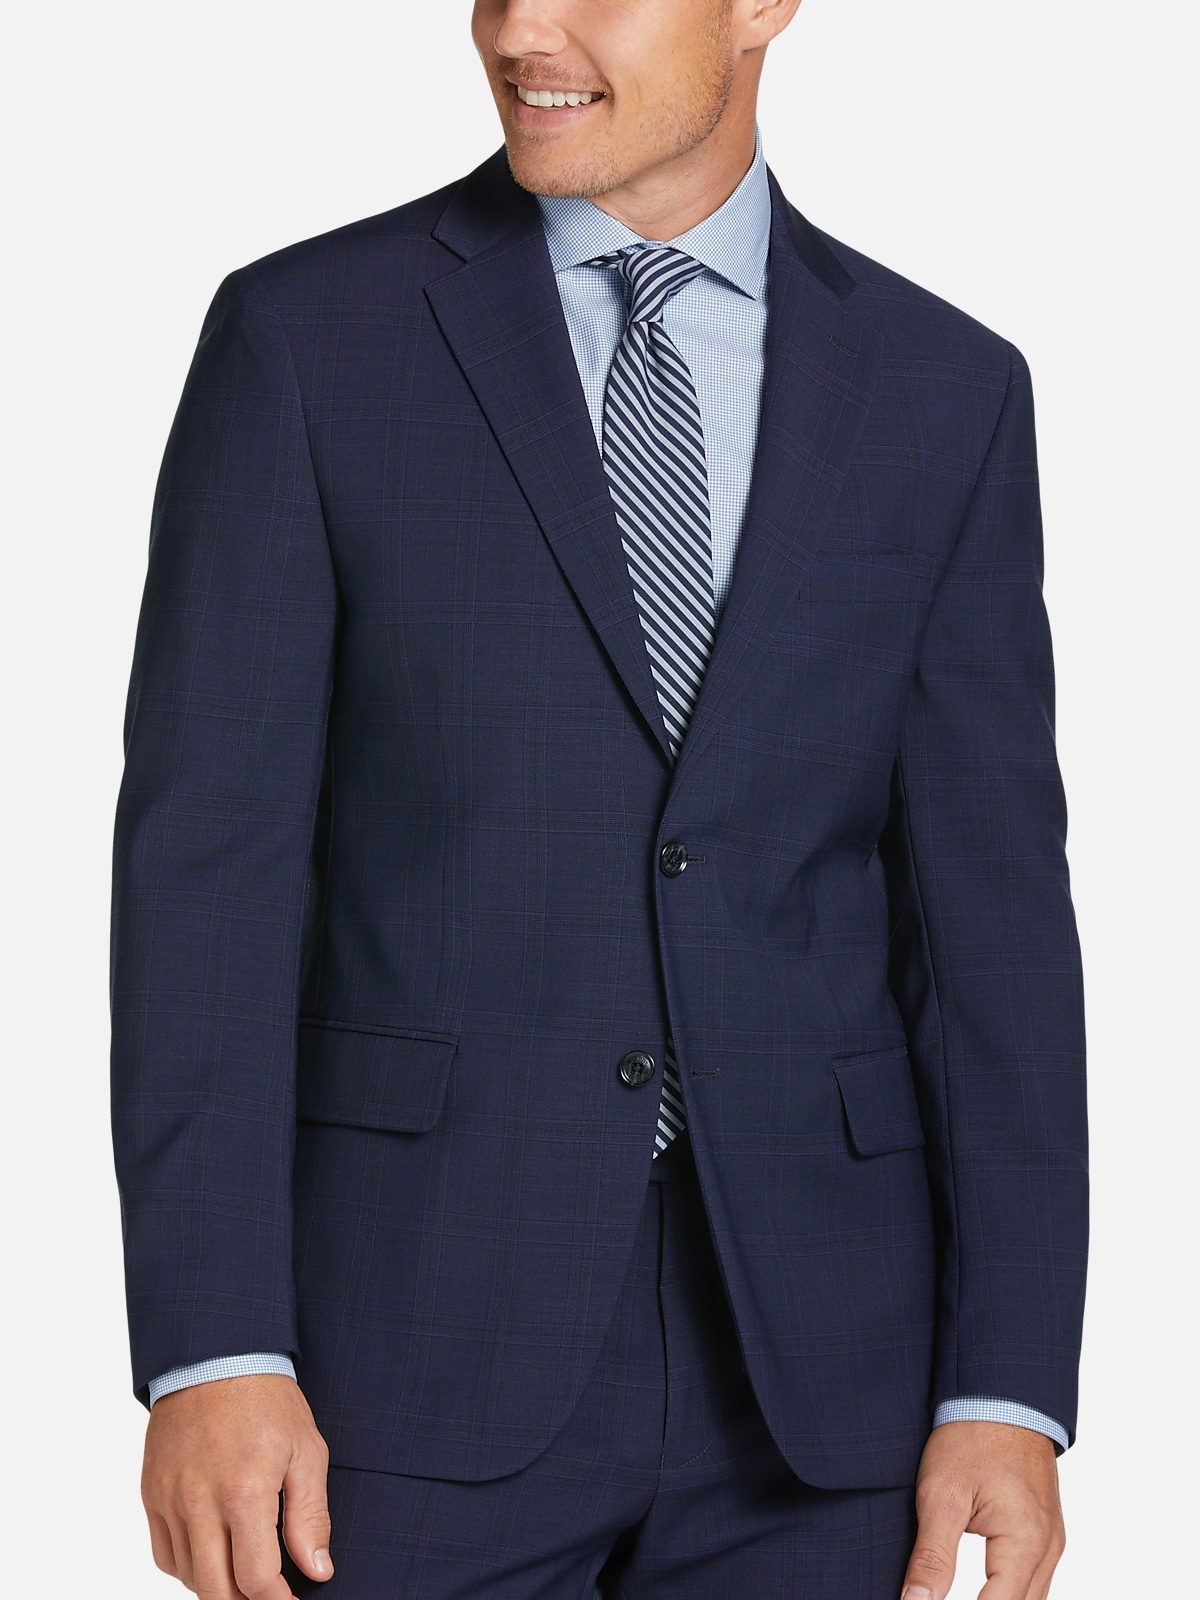 Tommy Hilfiger Modern Fit Suit | All Clearance $39.99| Men's Wearhouse